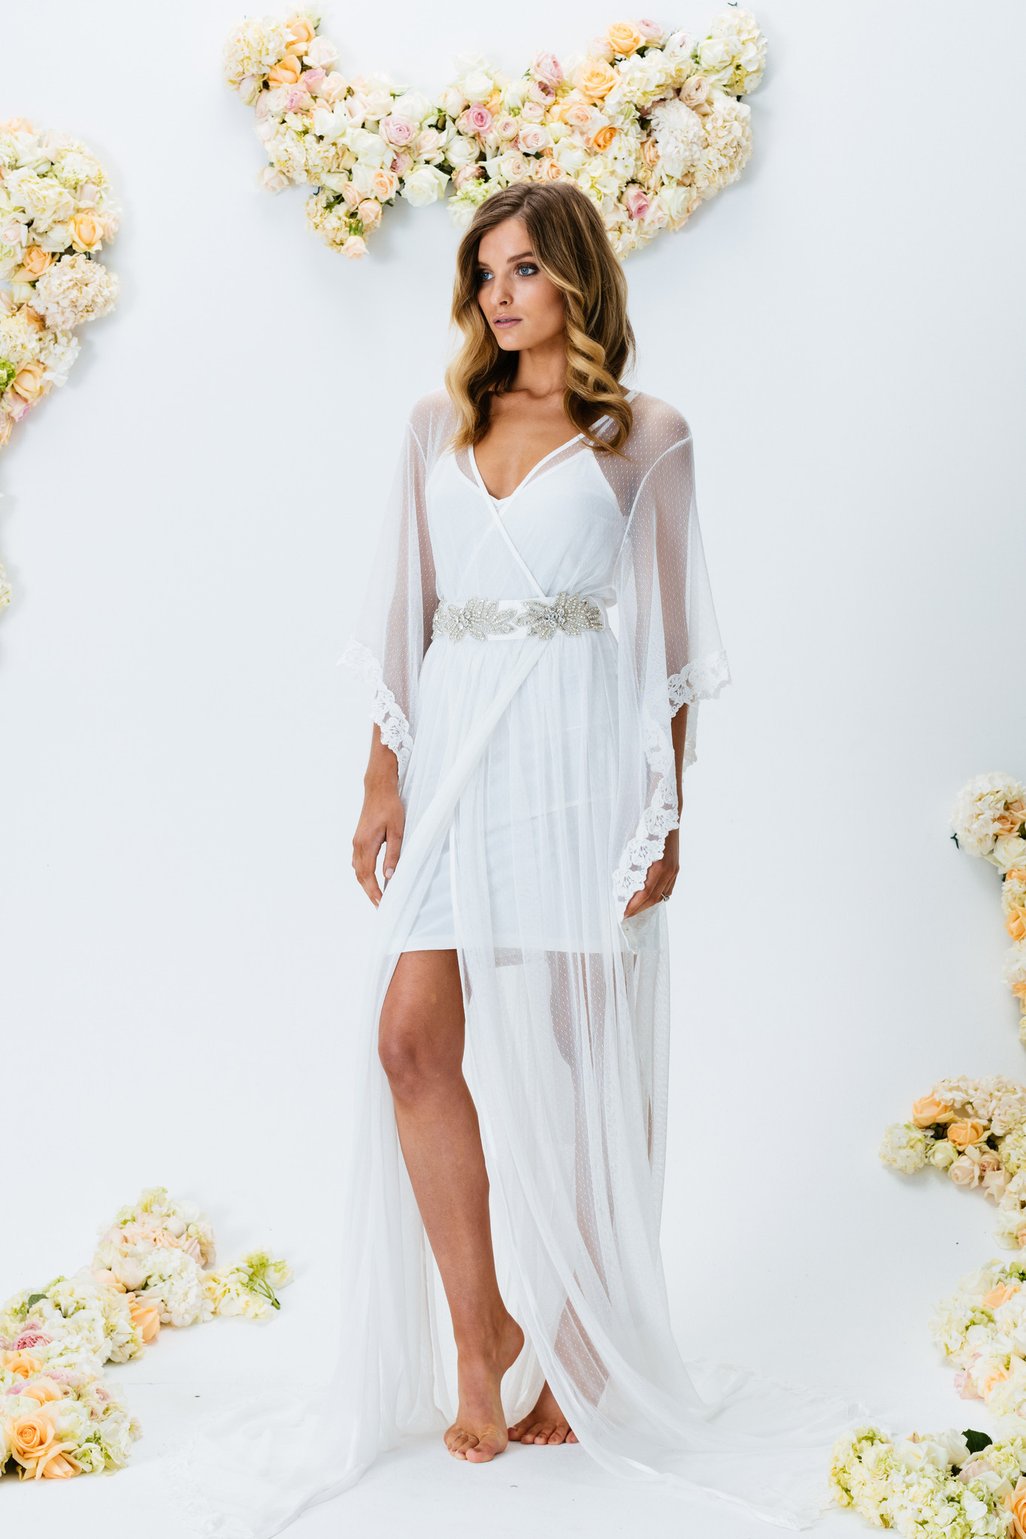 The beautiful robe that becomes a Simple Wedding Dress!